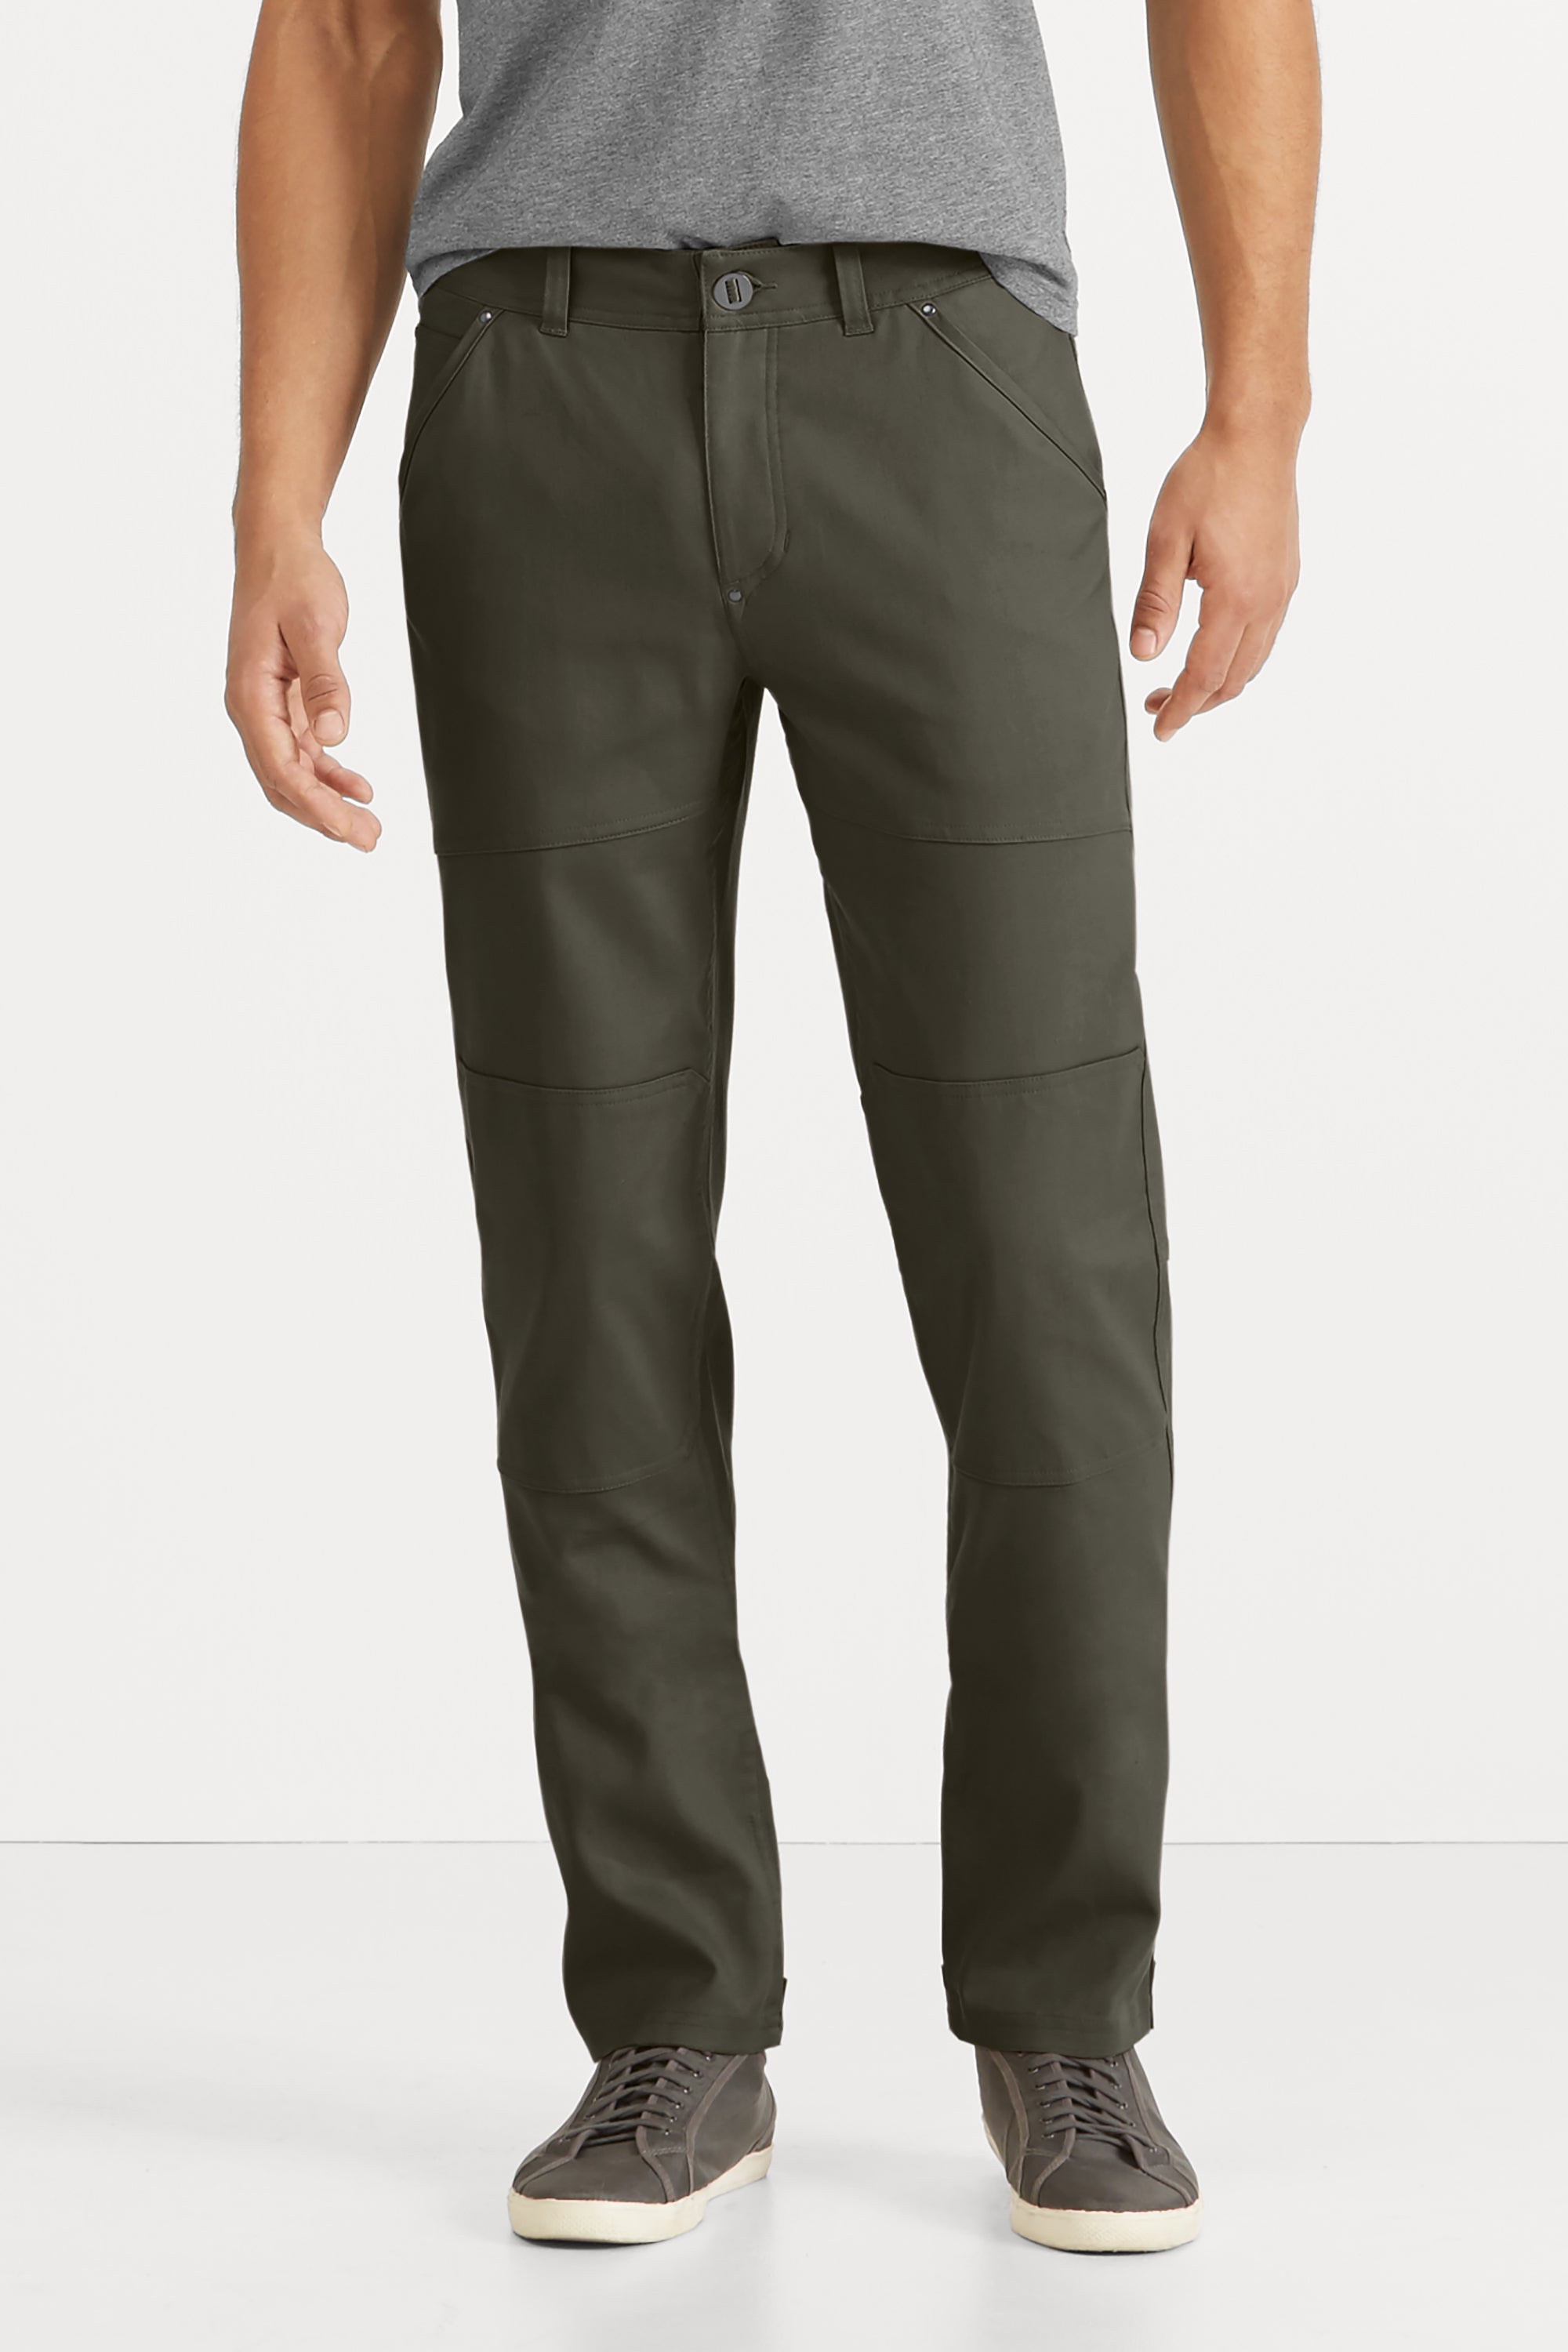 utility trousers